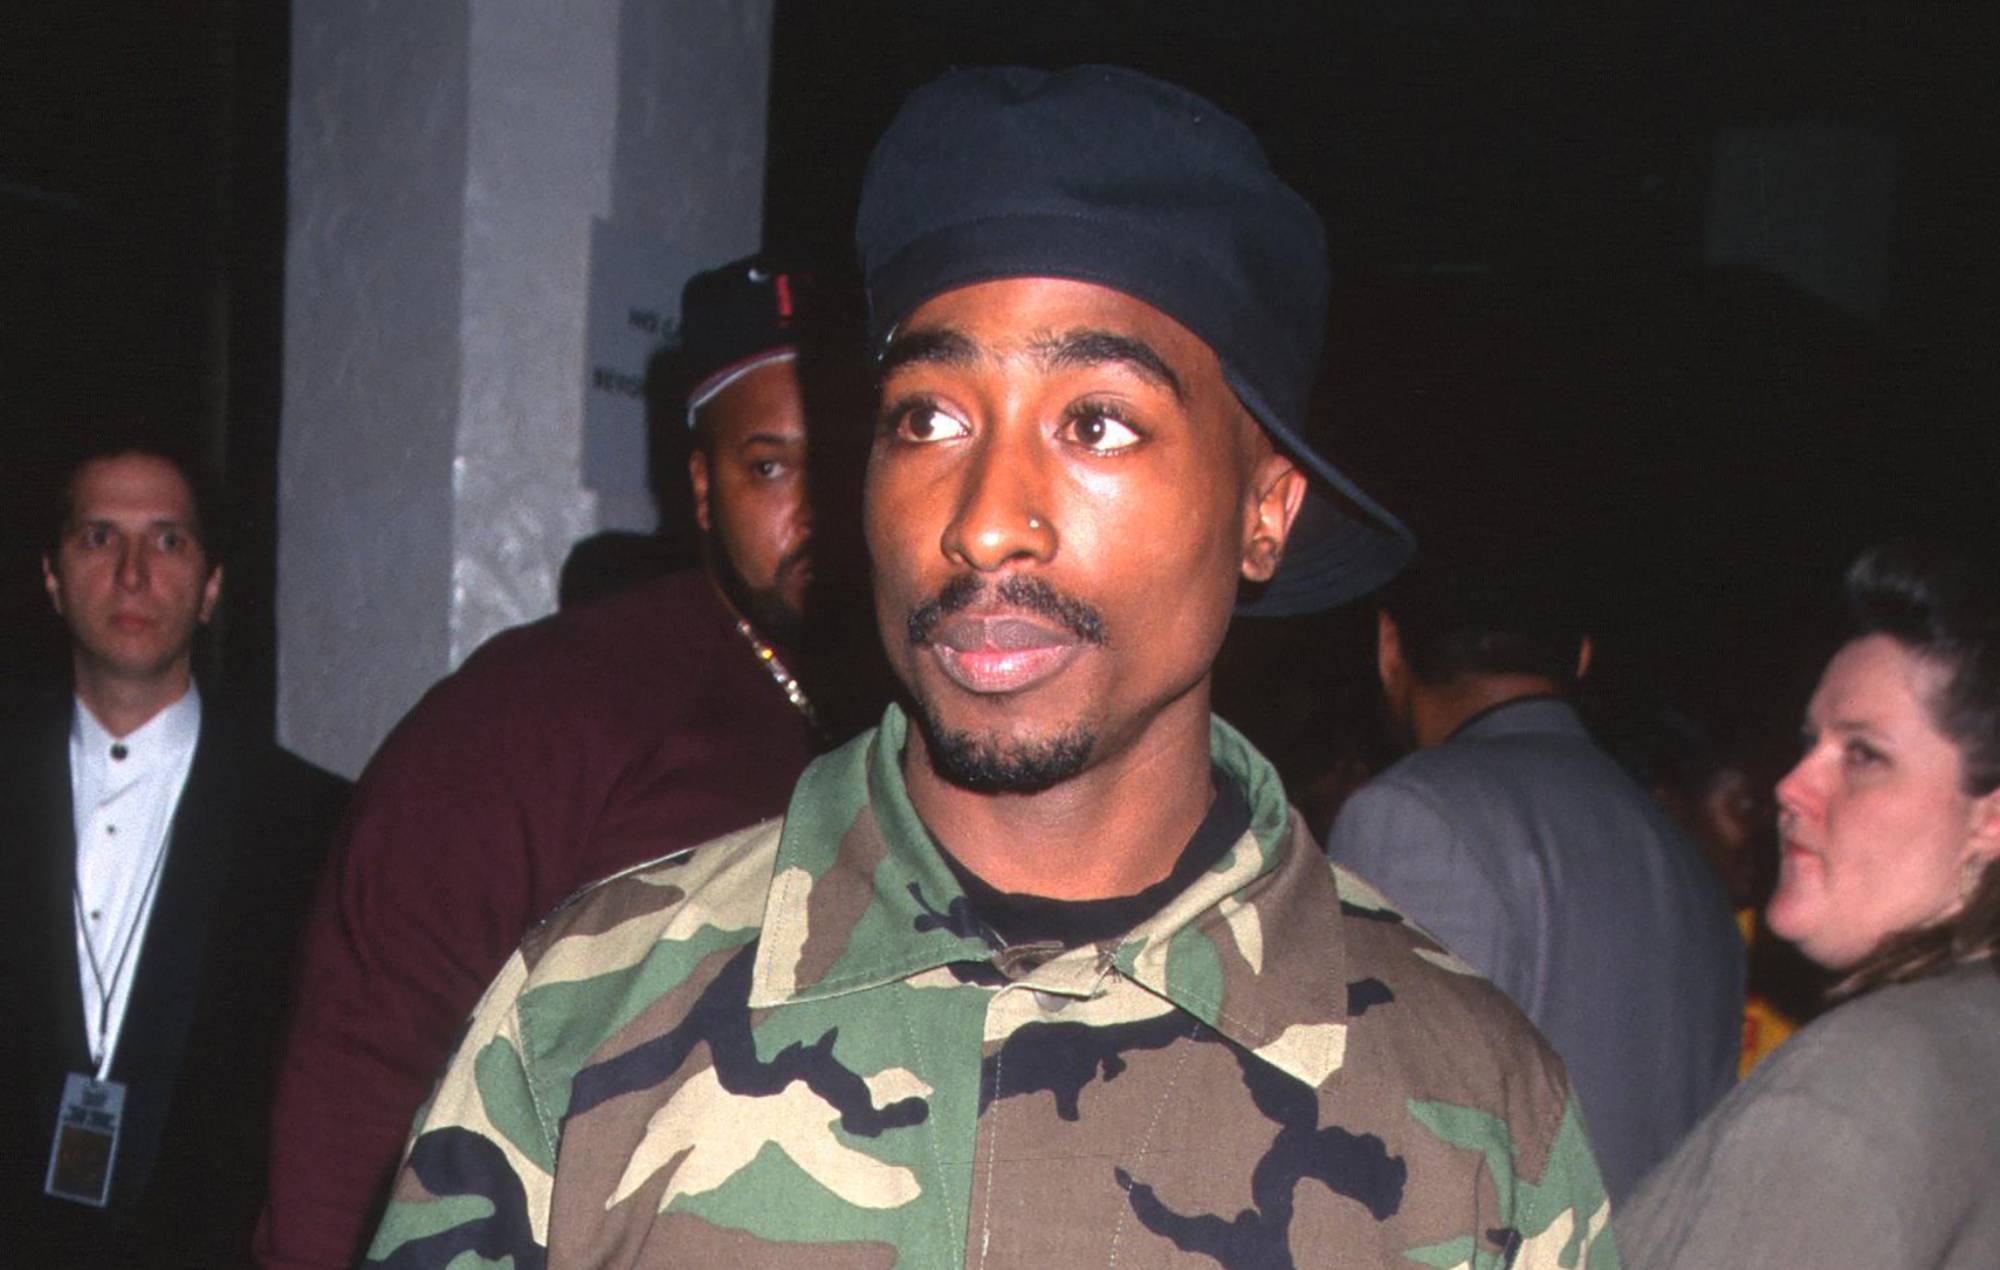 Tupac Shakur attends 10th Annual Soul Train Music Awards at the Shrine Auditorium in Los Angeles, California on March 29, 1996. (Photo by Ron Galella, Ltd./Ron Galella Collection via Getty Images)